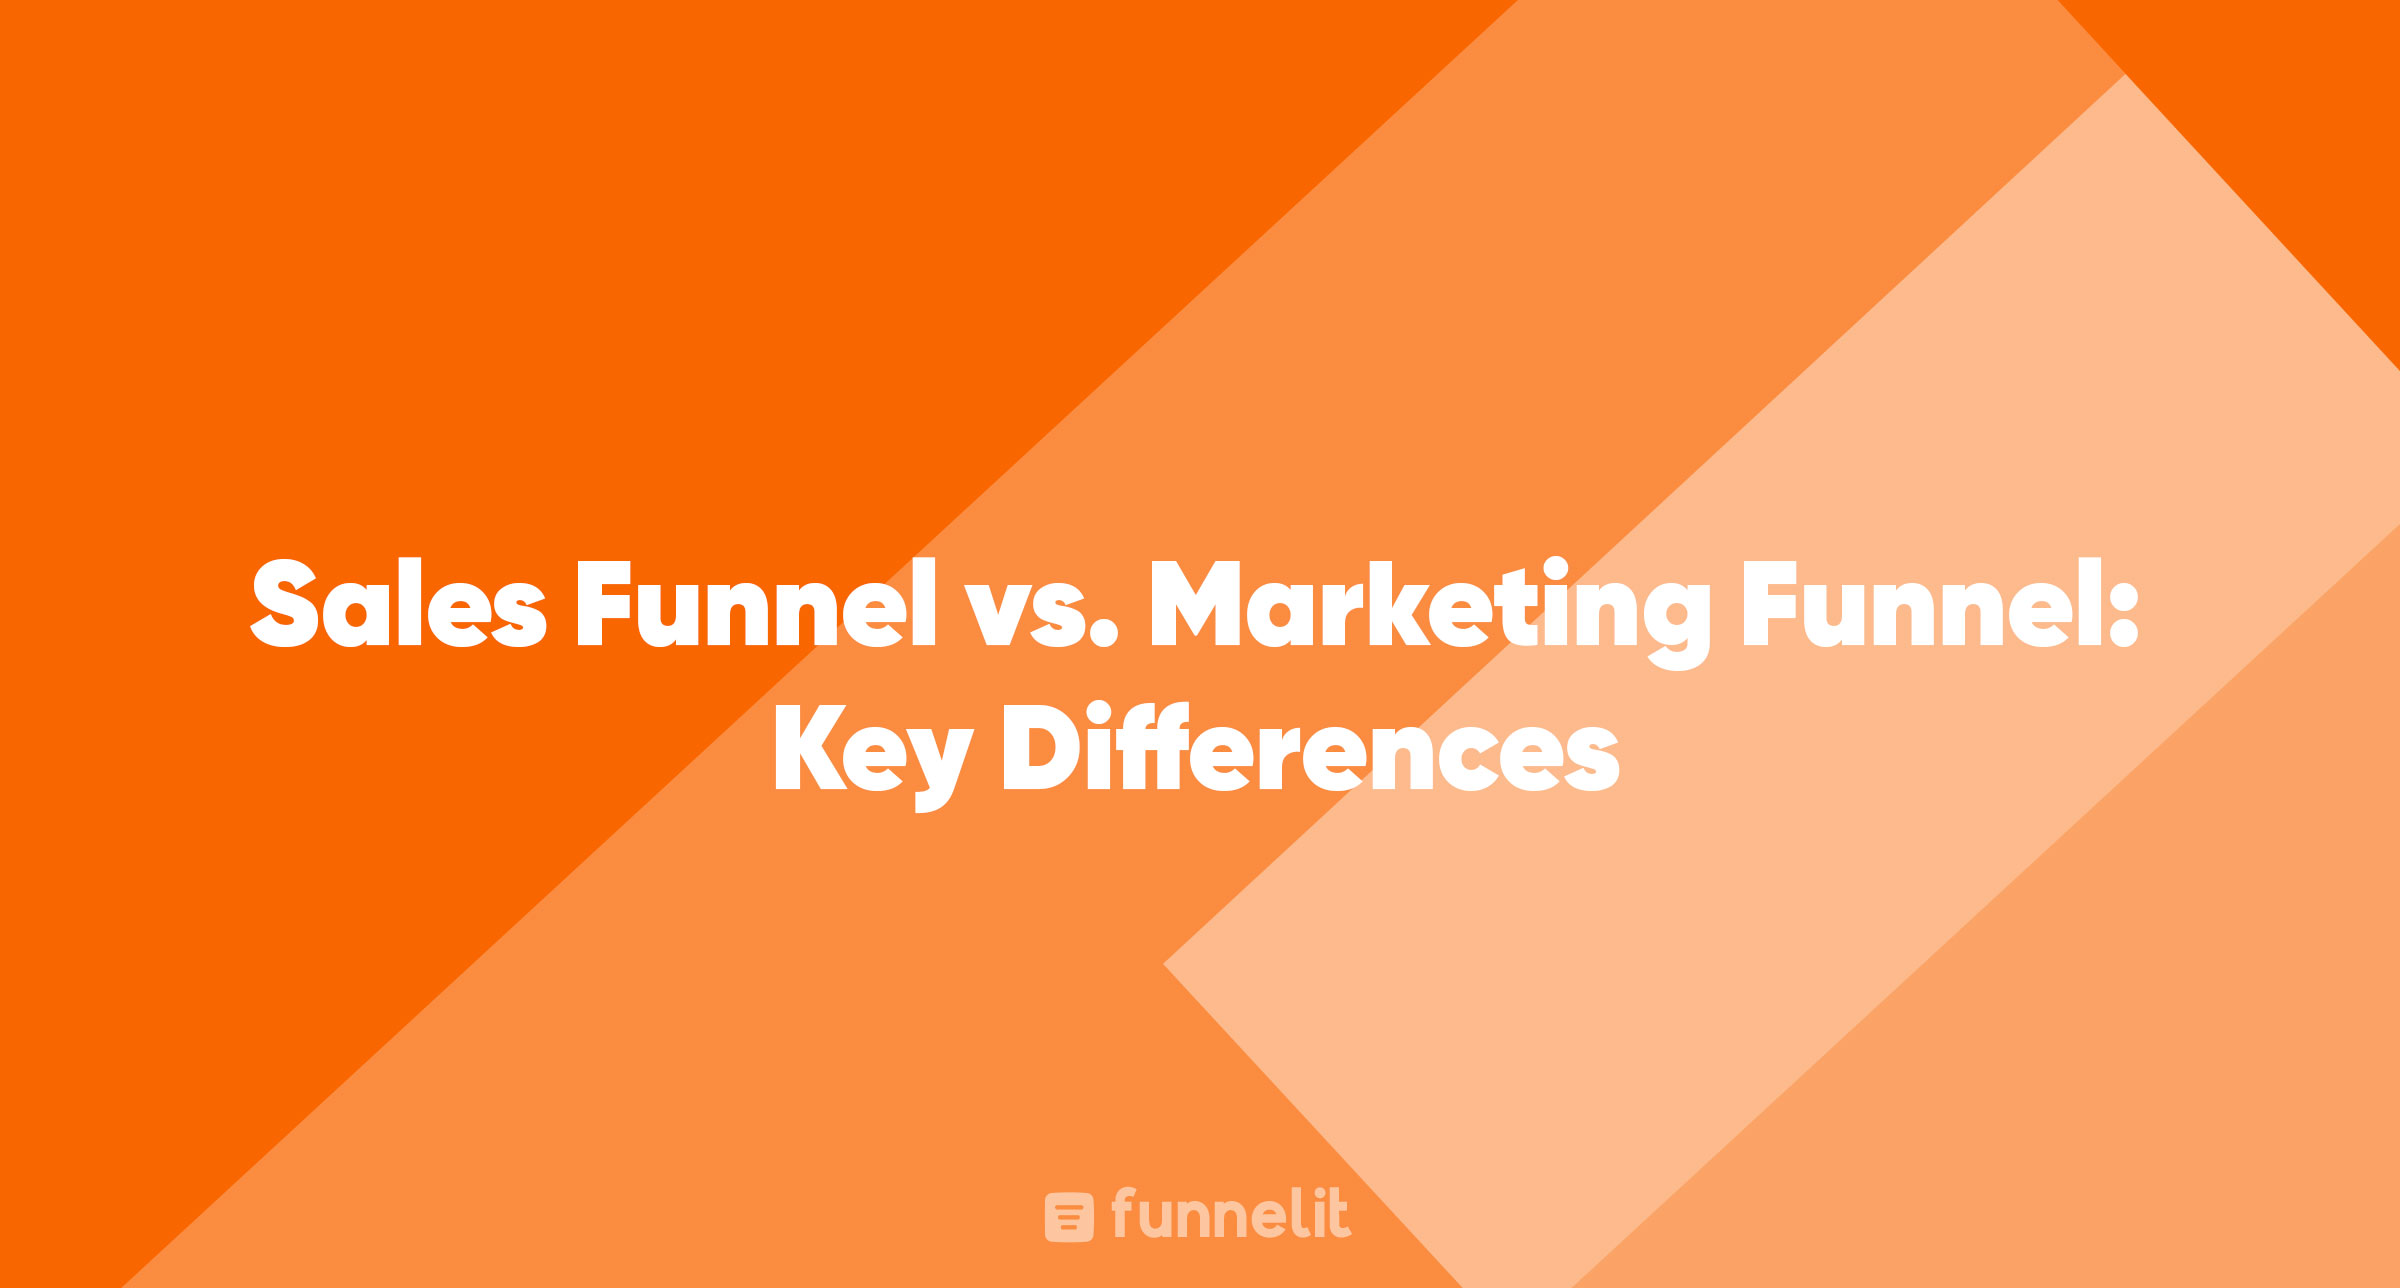 Article | Sales Funnel vs. Marketing Funnel: Key Differences